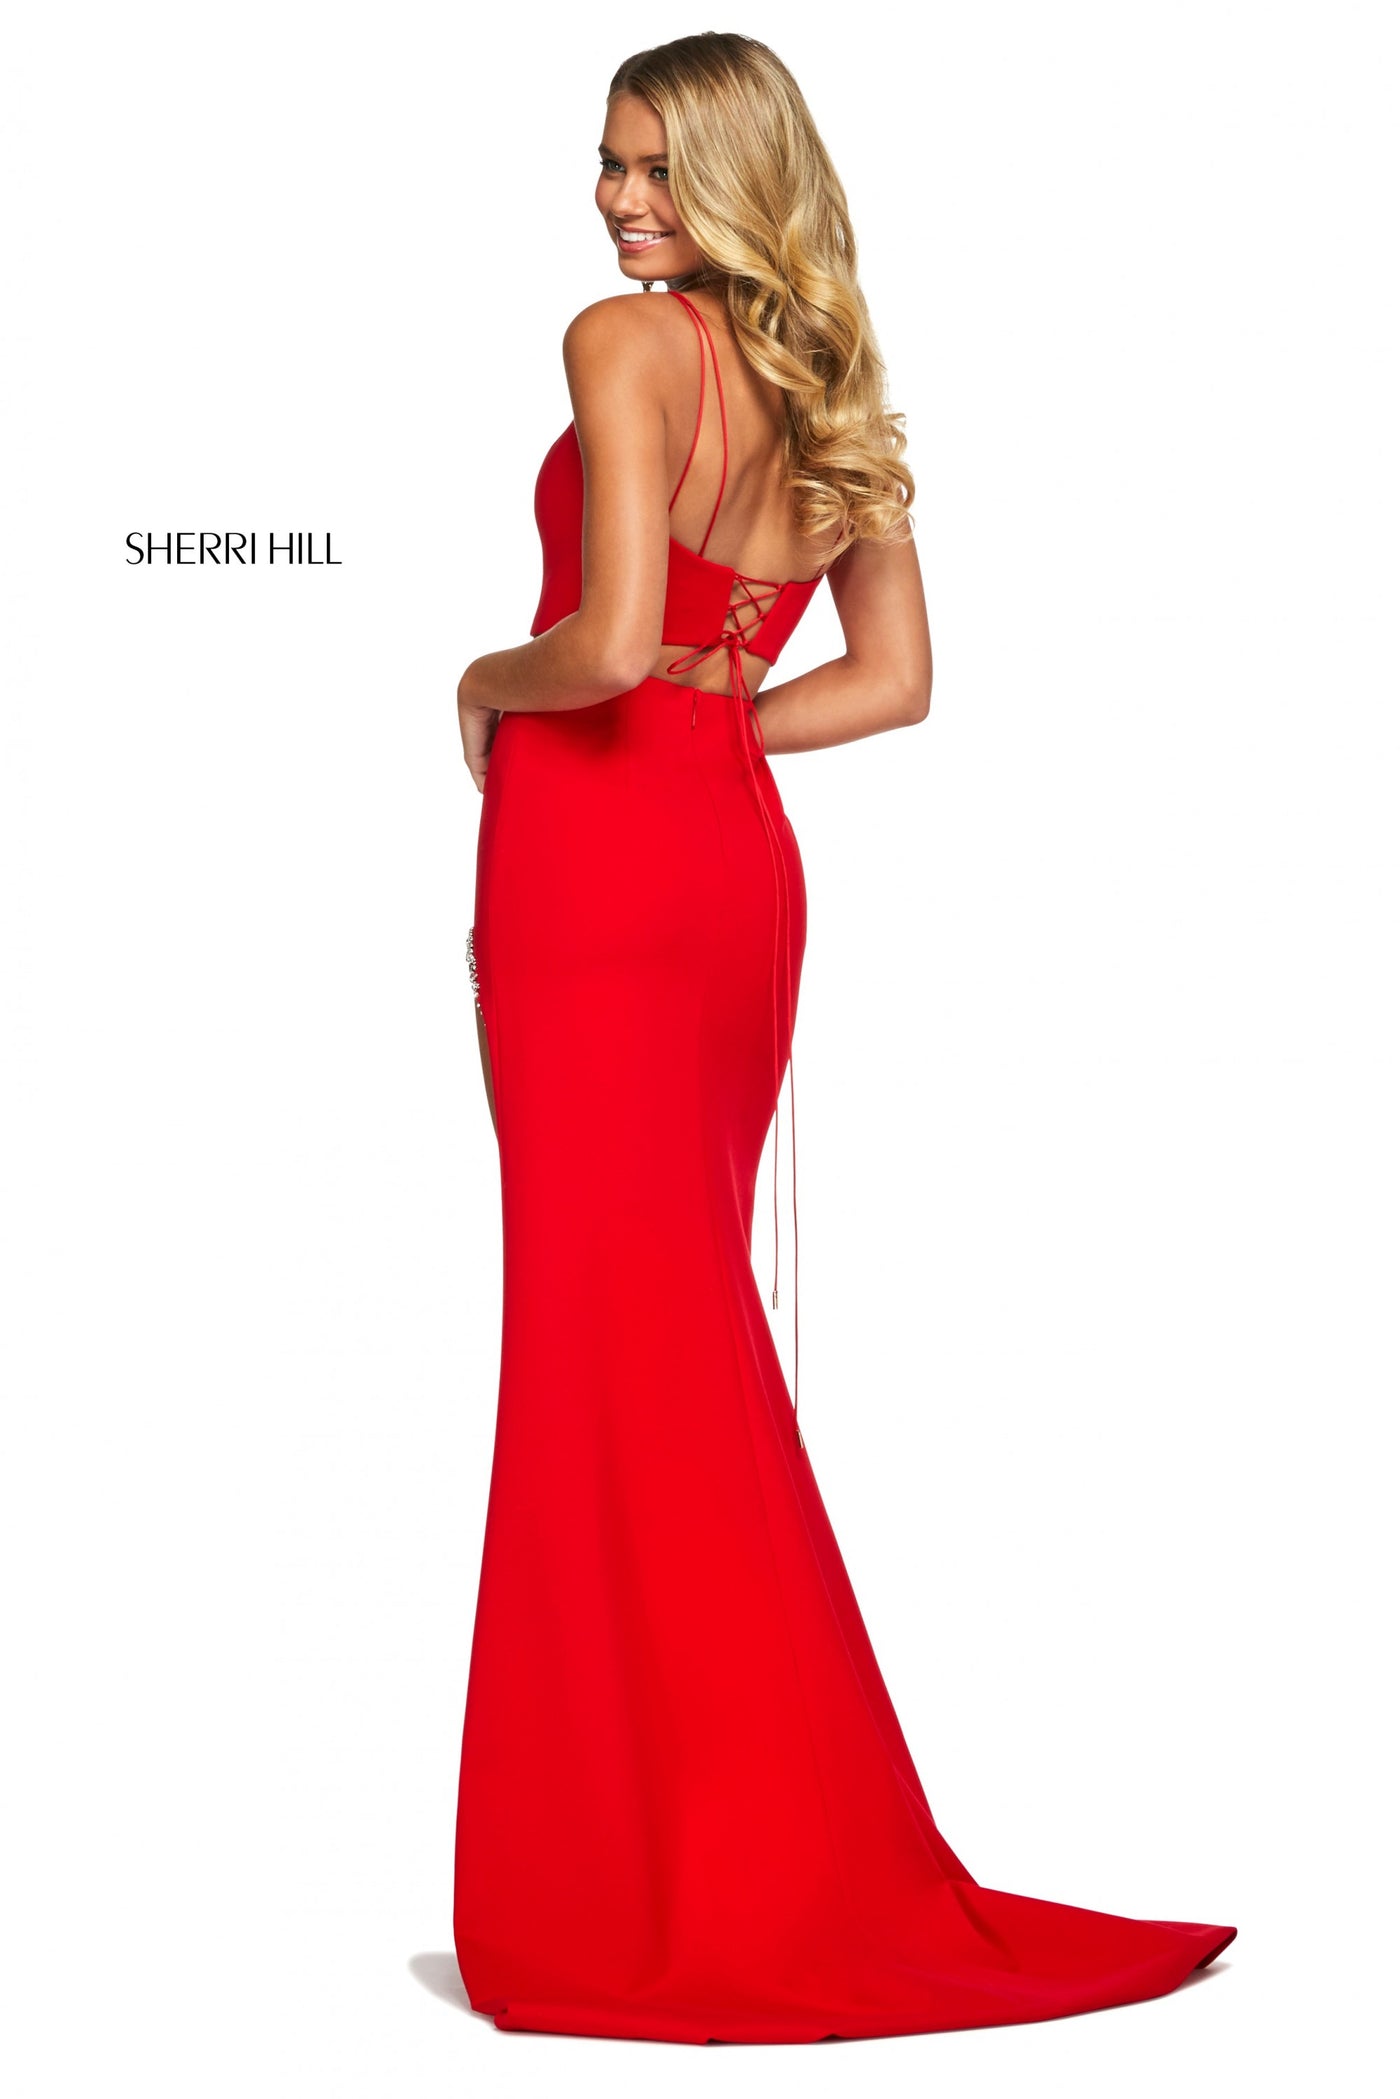 Sherri Hill 53602 (Only Size 2 Red Final SALE)